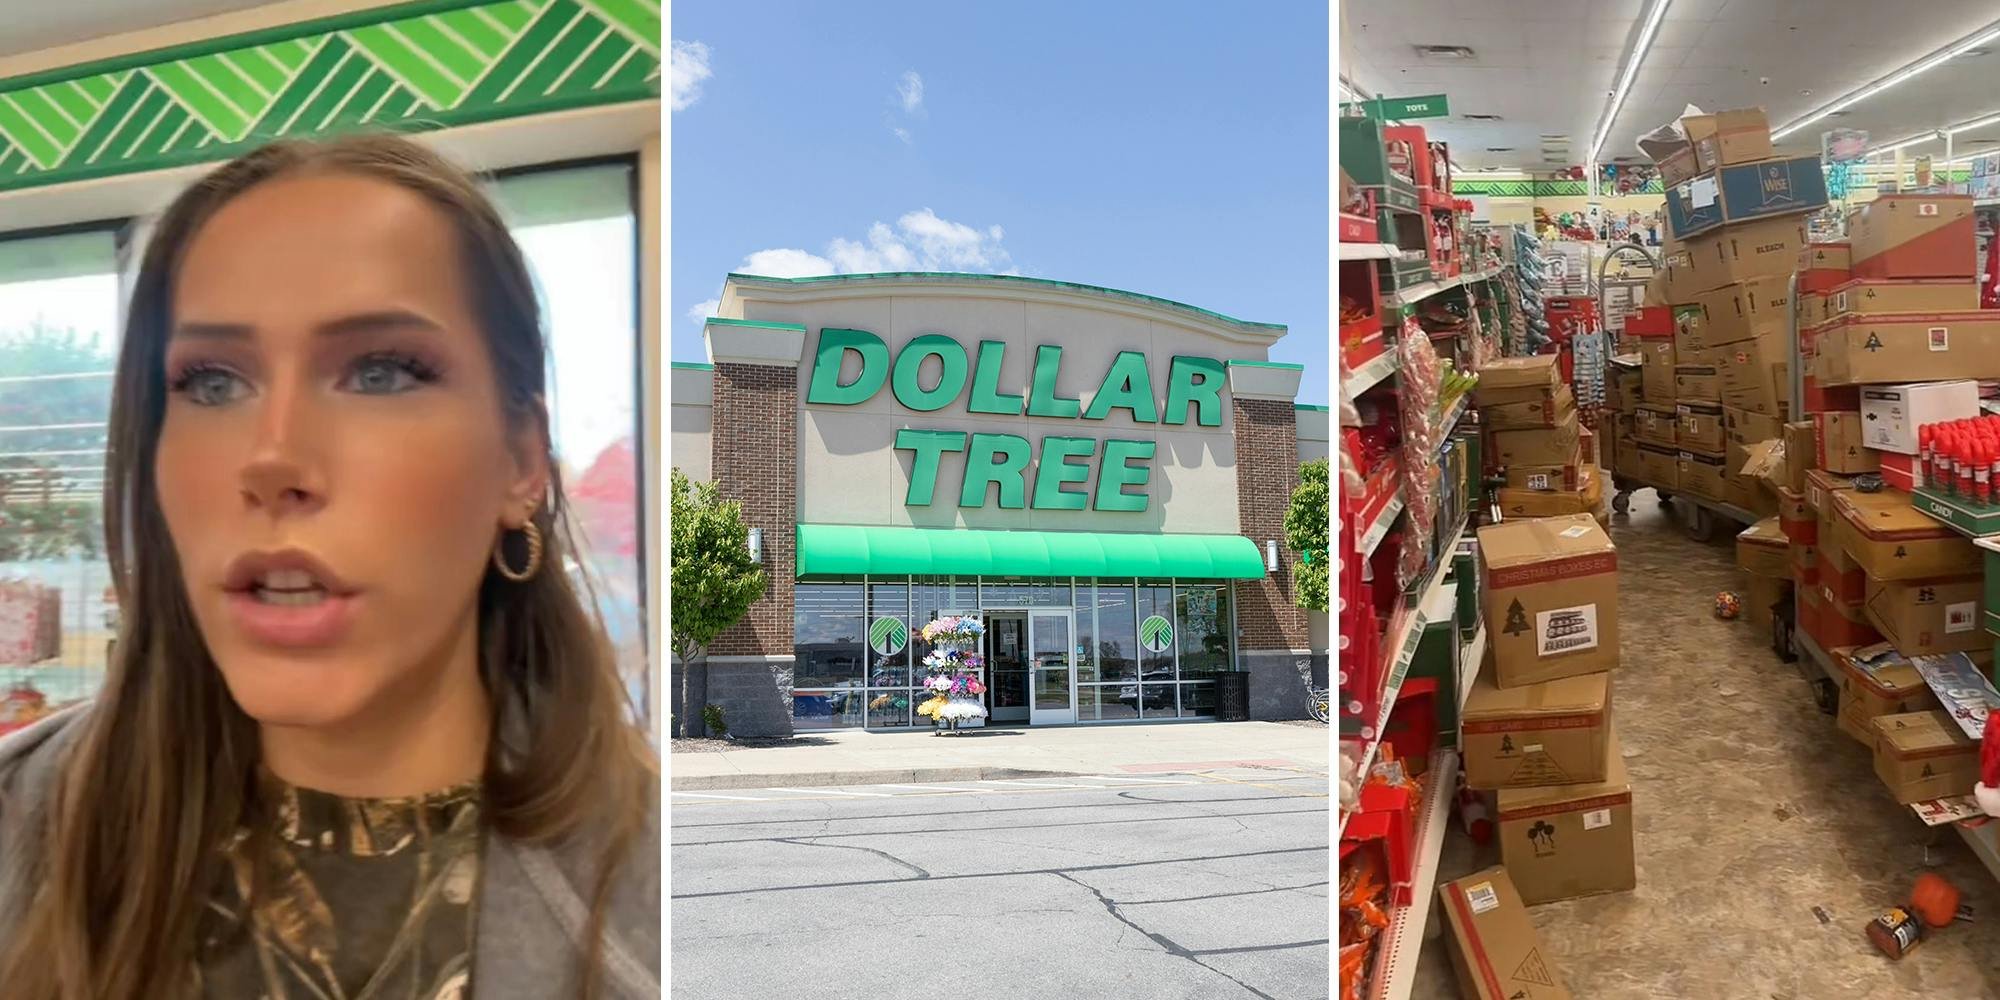 'Never ever have I seen one look like this': Shopper praised for showing what a 'real Dollar Tree' looks like